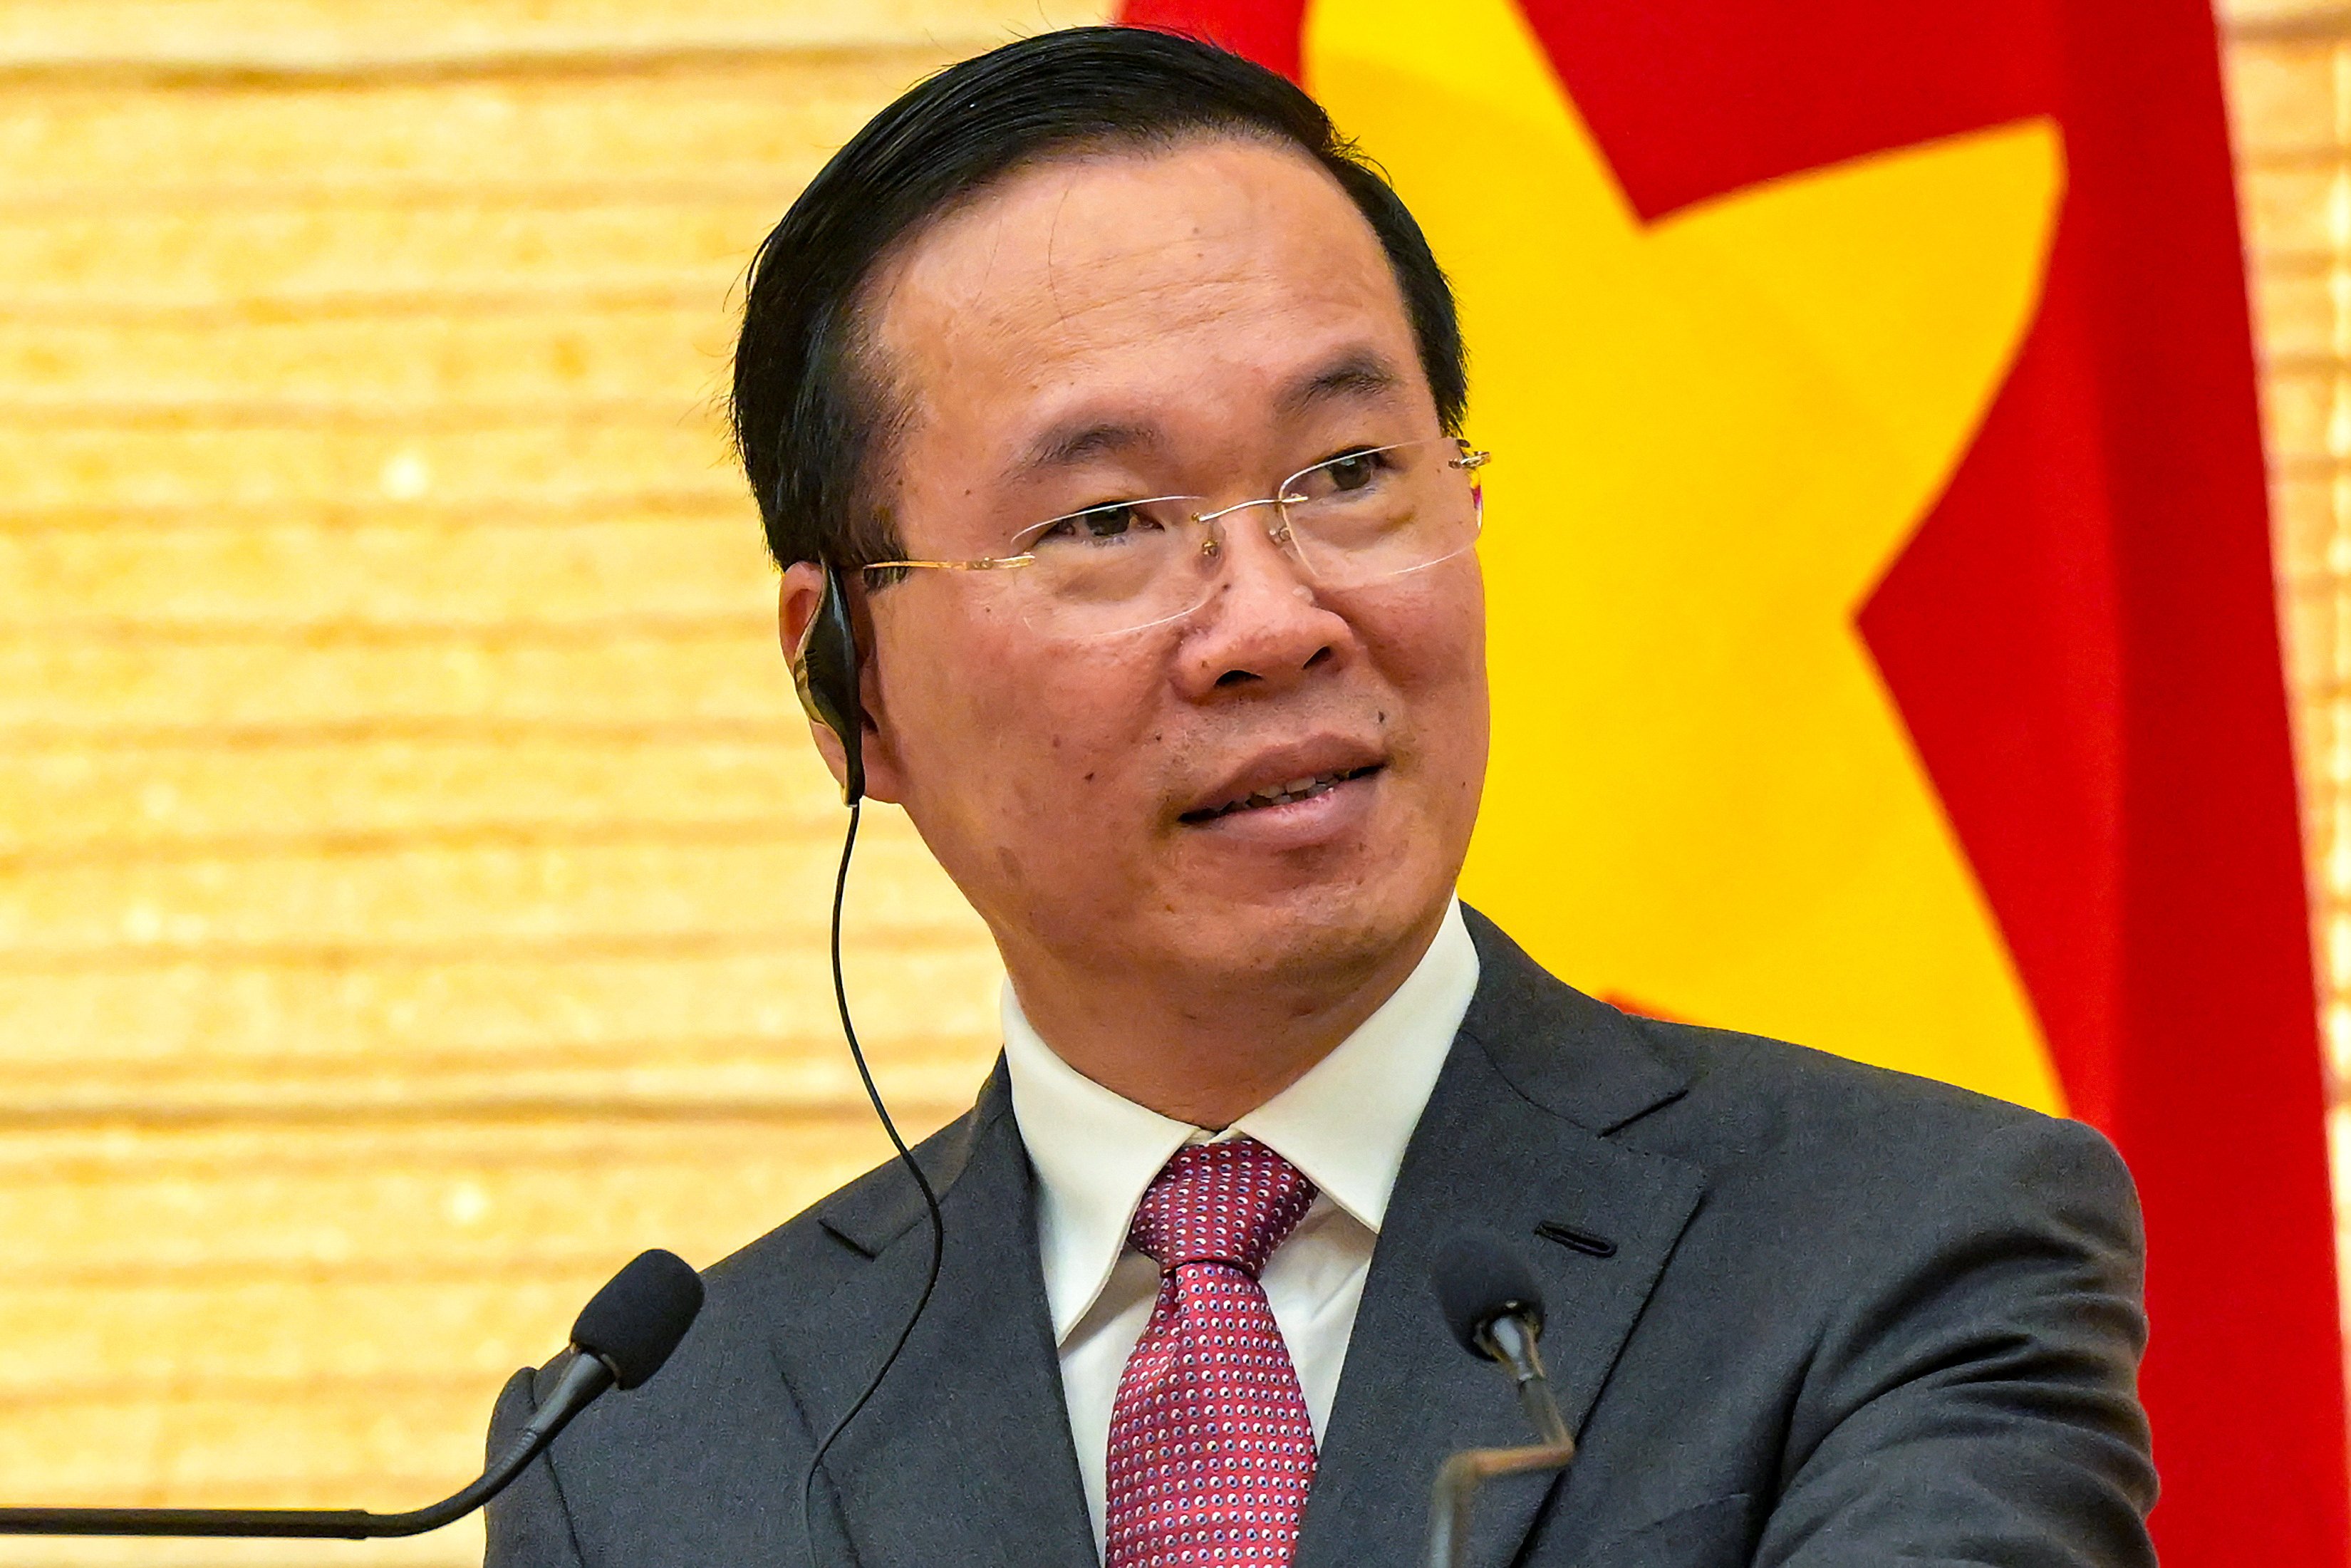 Vo Van Thuong had been seen as a protégé of Nguyen Phu Trong, the country’s top leader. Photo: AP